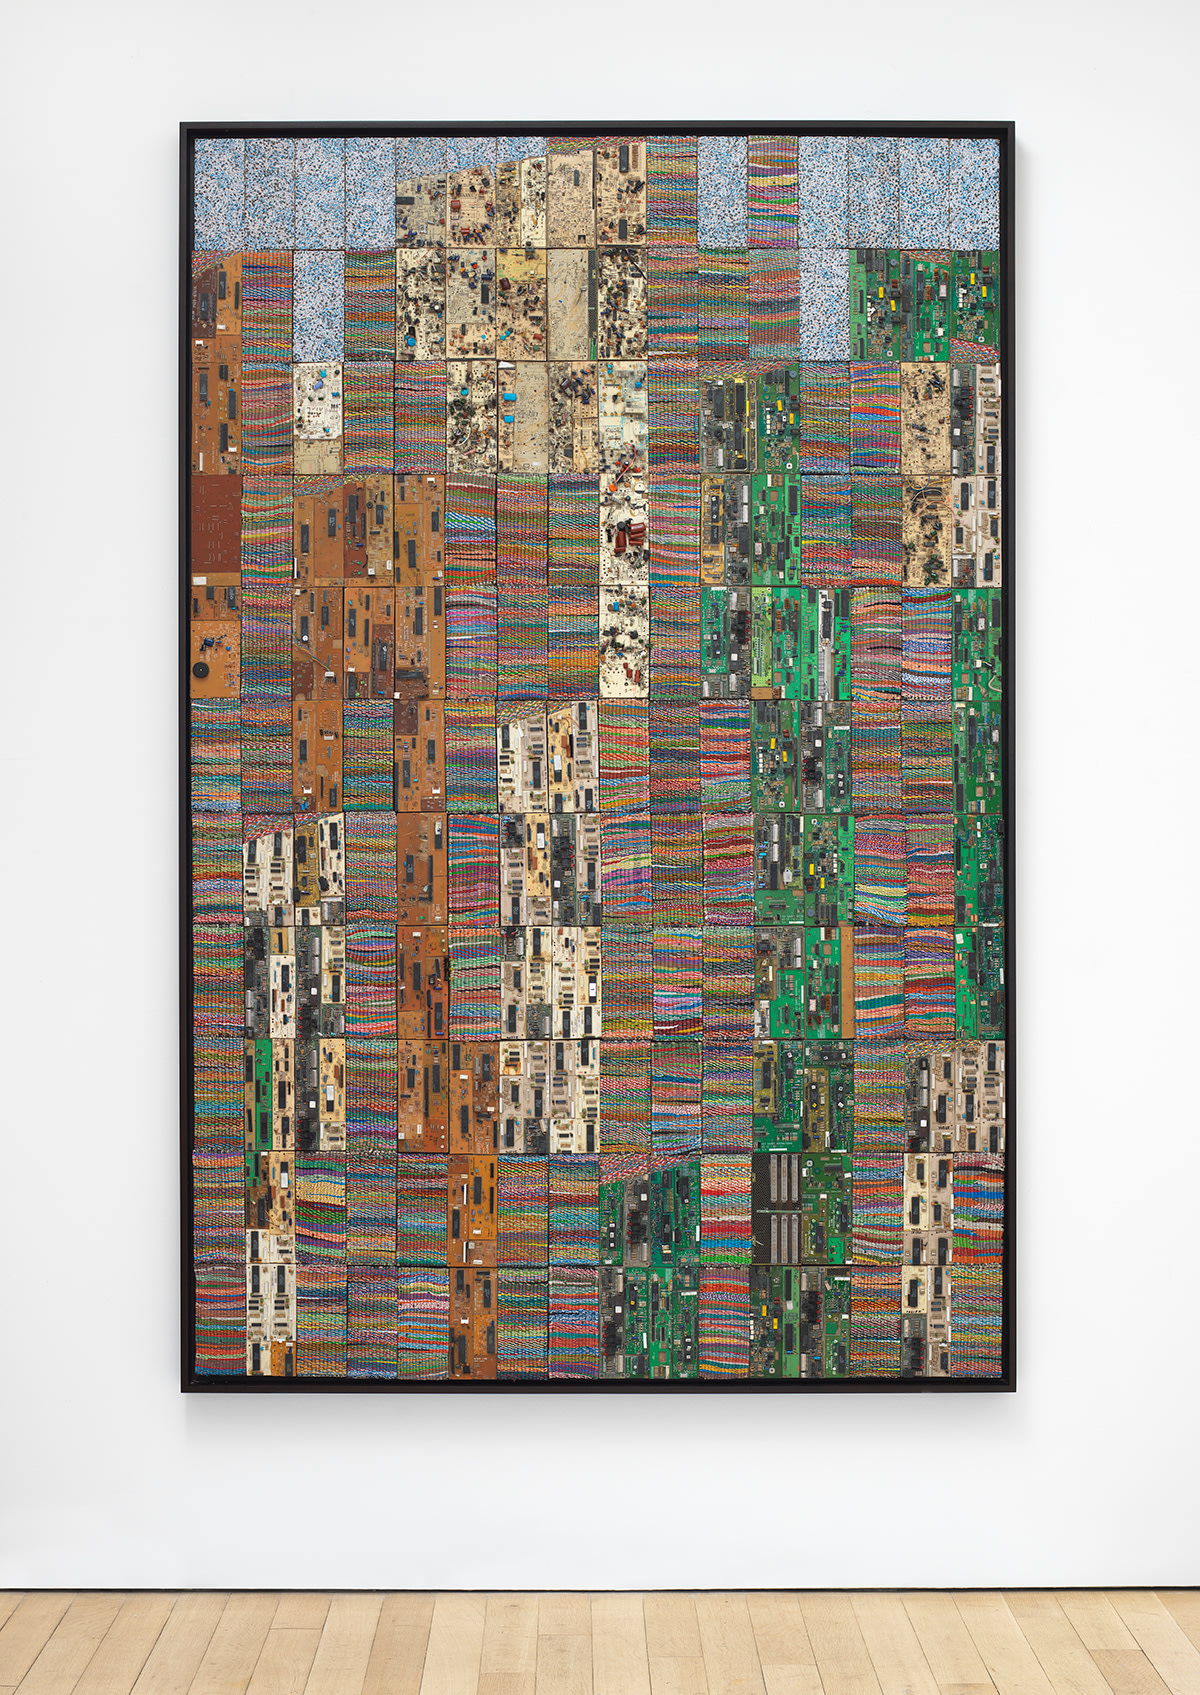 reclaimed electrical wires and components creating a multicolored pattern of rectangles